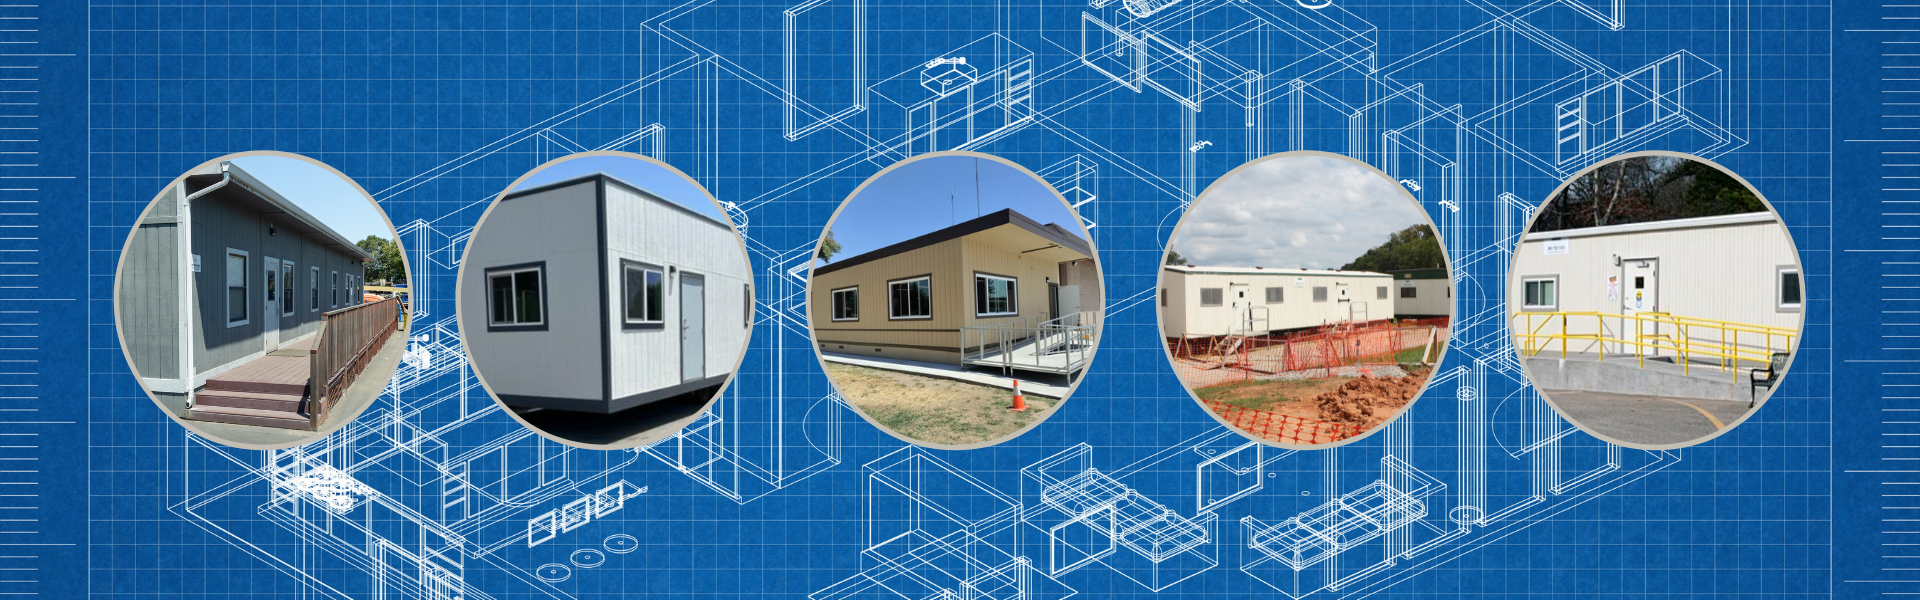 Different types of modular buildings and portable office trailers